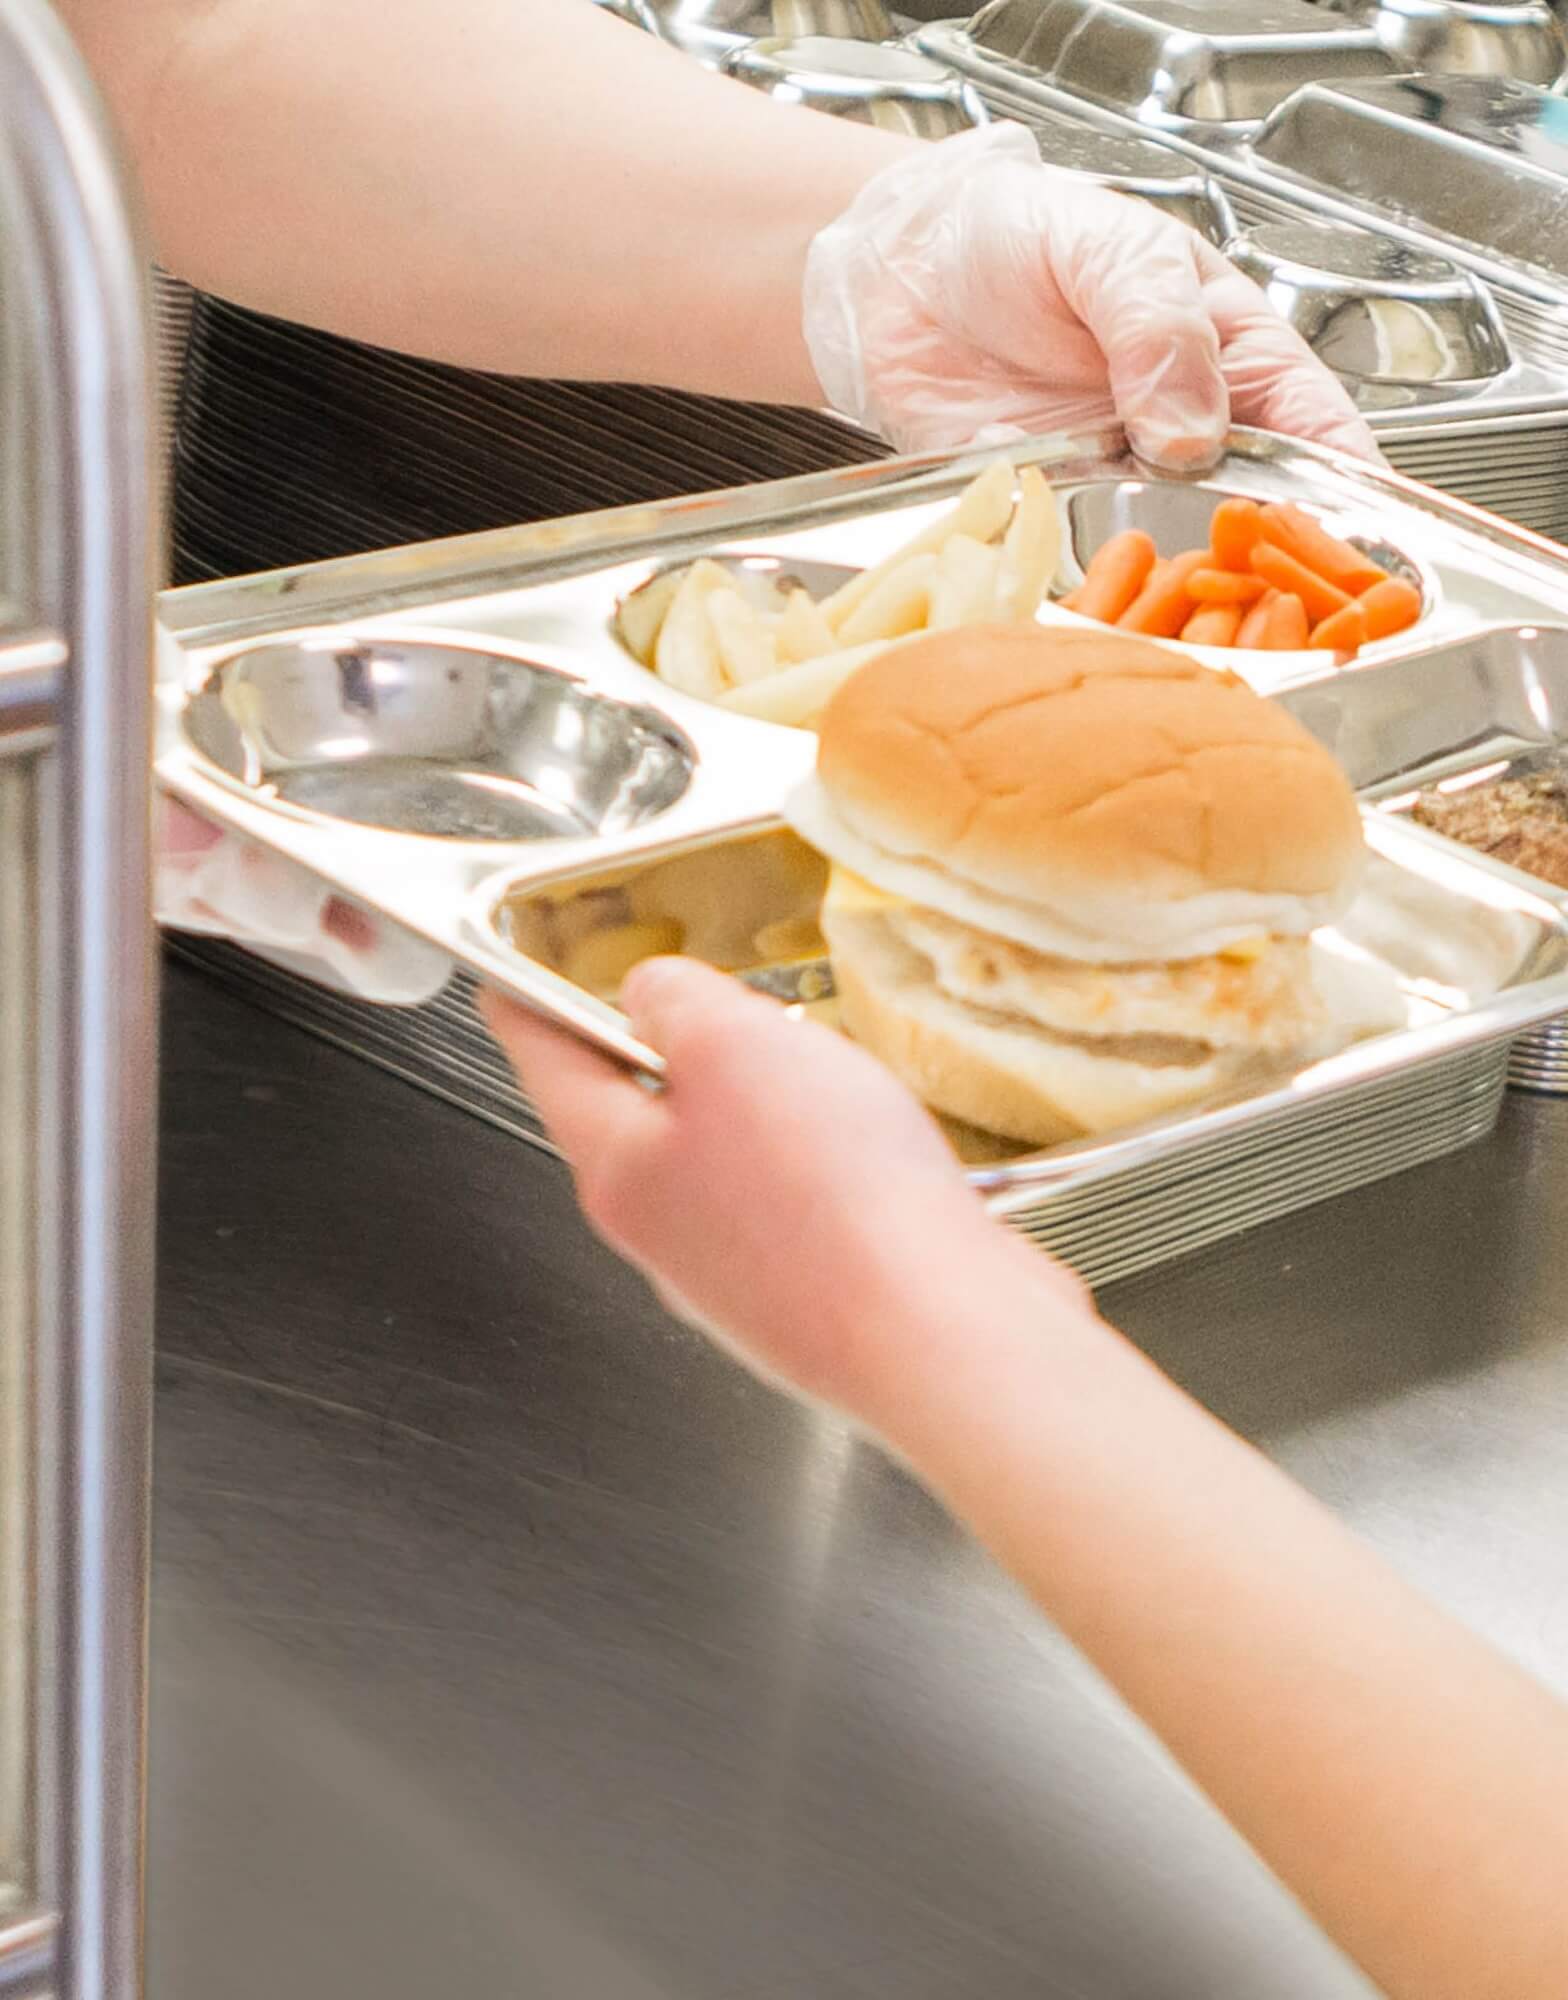 stainless steel cafeteria tray being served in cafeteria